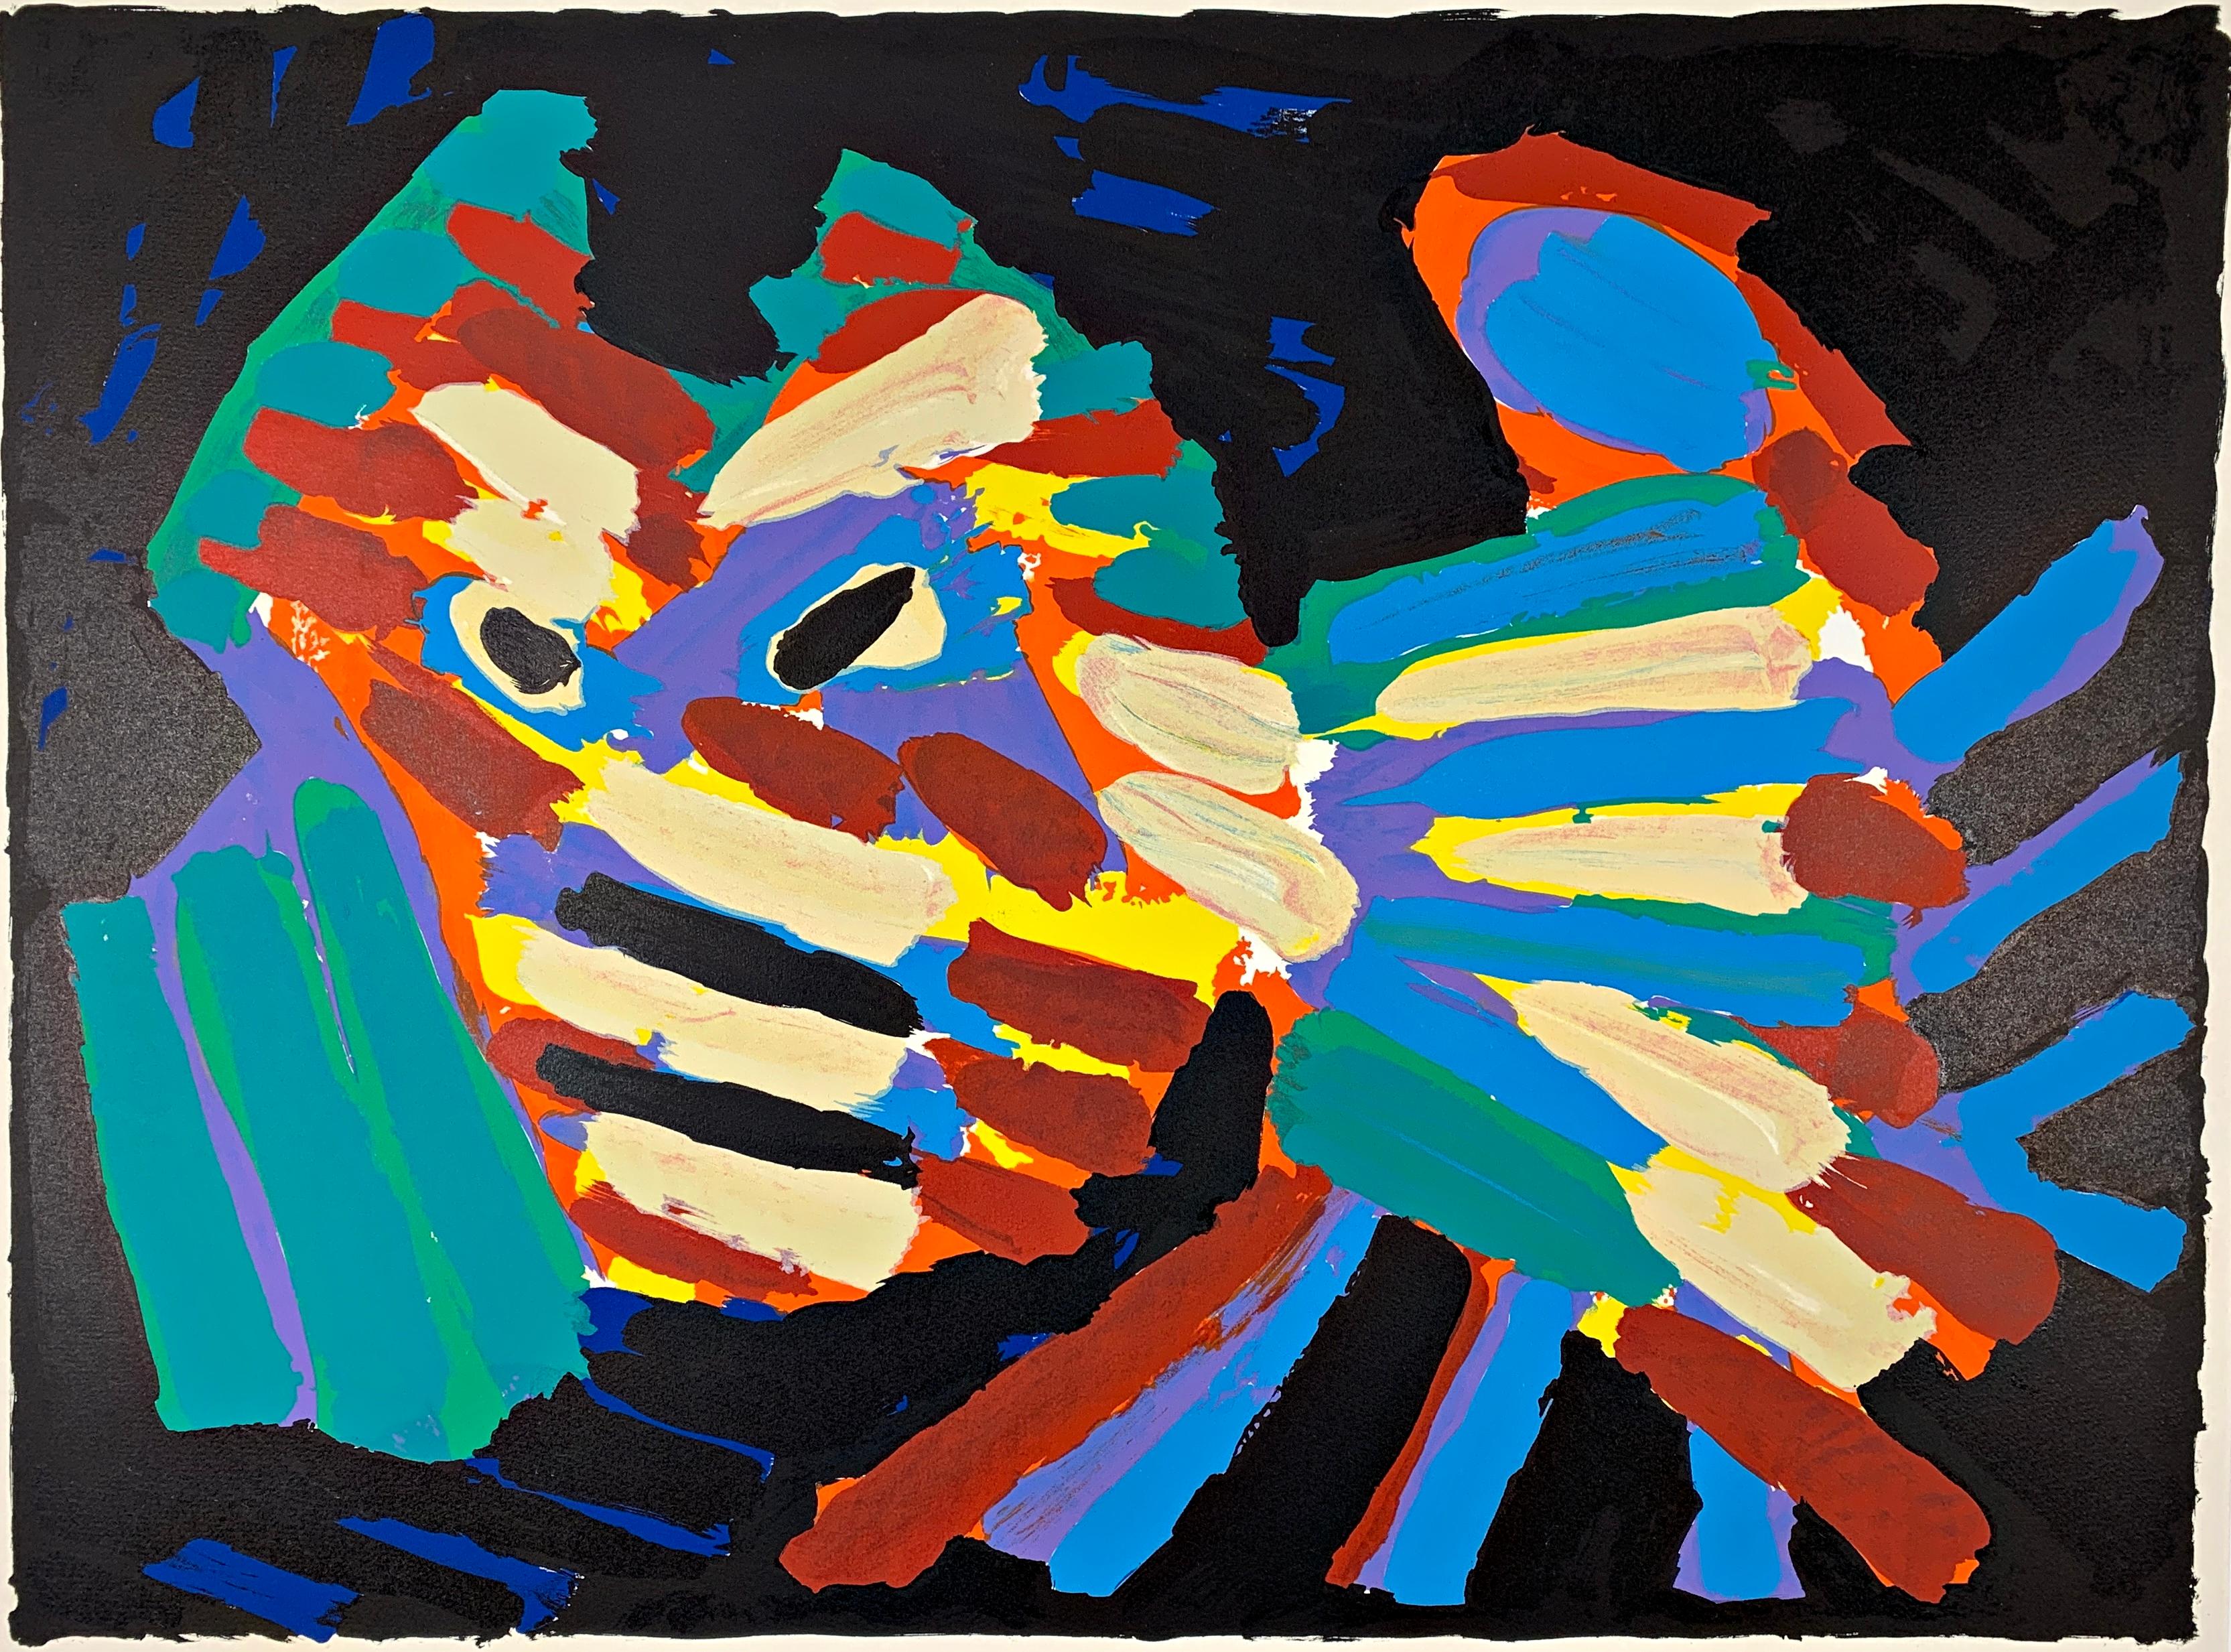 Karel Appel
Amsterdam 1921 - 2006 Zurich
Fighting Cat, 1979
Color lithograph on Arches paper
Signed in pencil lower right, inscribed lower left: "A.P." (Artist's Proof)
Image: 55.9 x 76.2 cm
Sheet size: 62.9 x 81.9 cm
Passepartout: 78.5 x 96